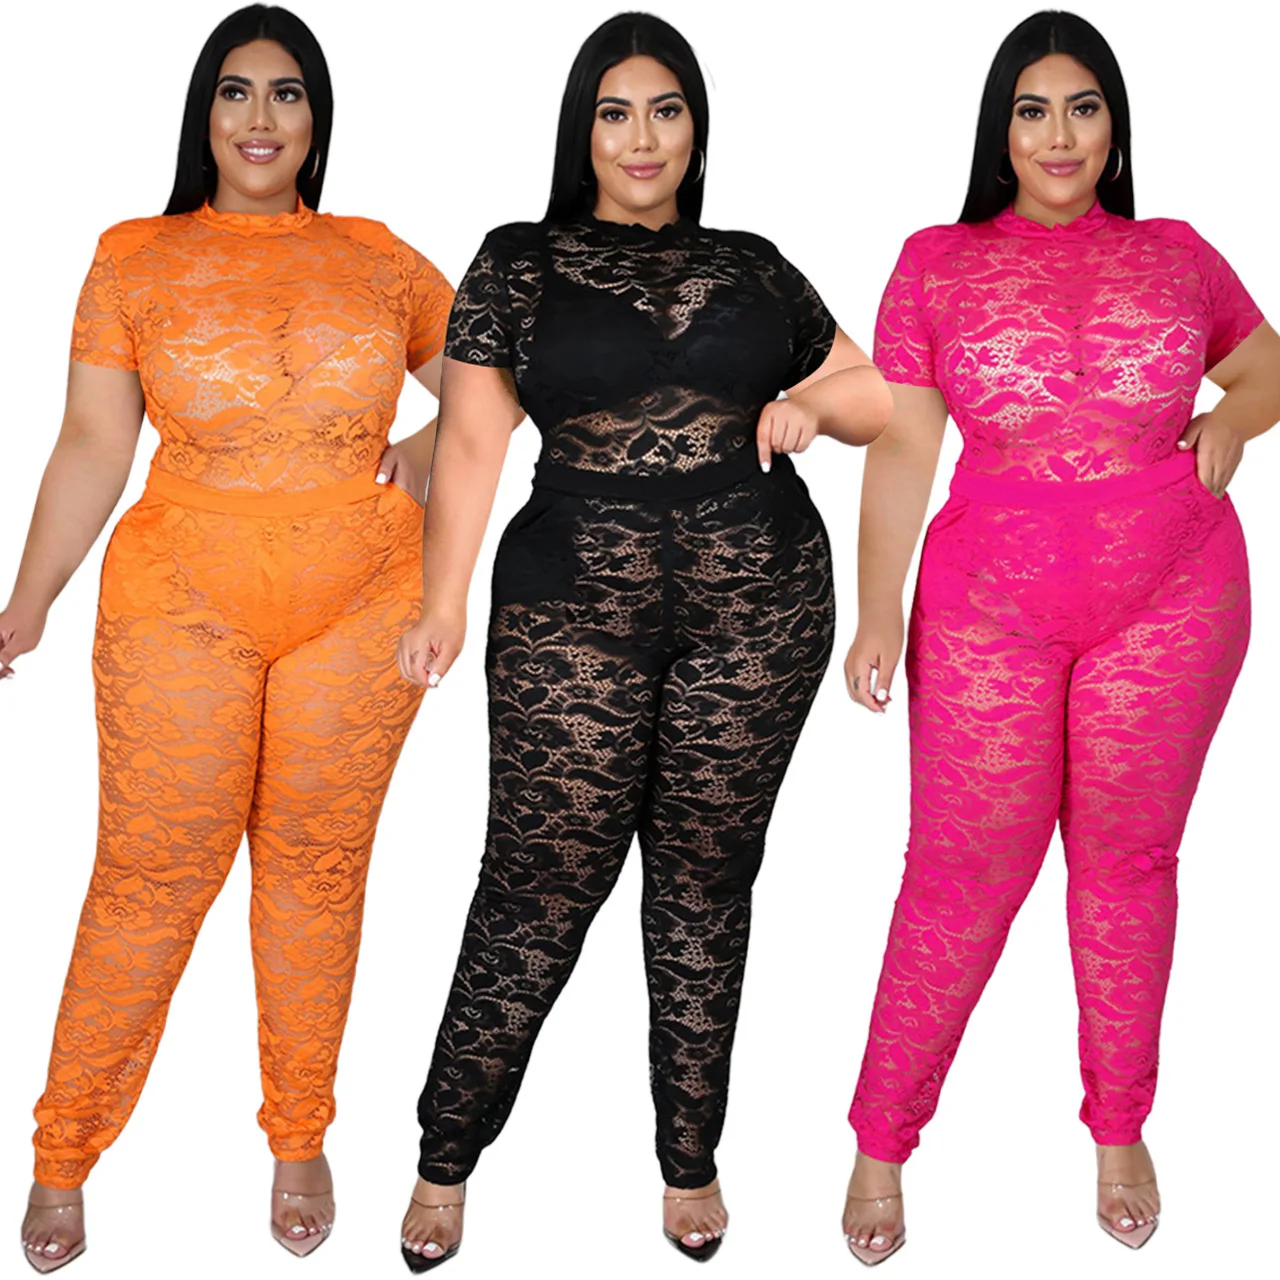 

J22Y6107 New arrival fat lady women clothing set plus size women's sets club see through summer clothes sexy lace two piece sets